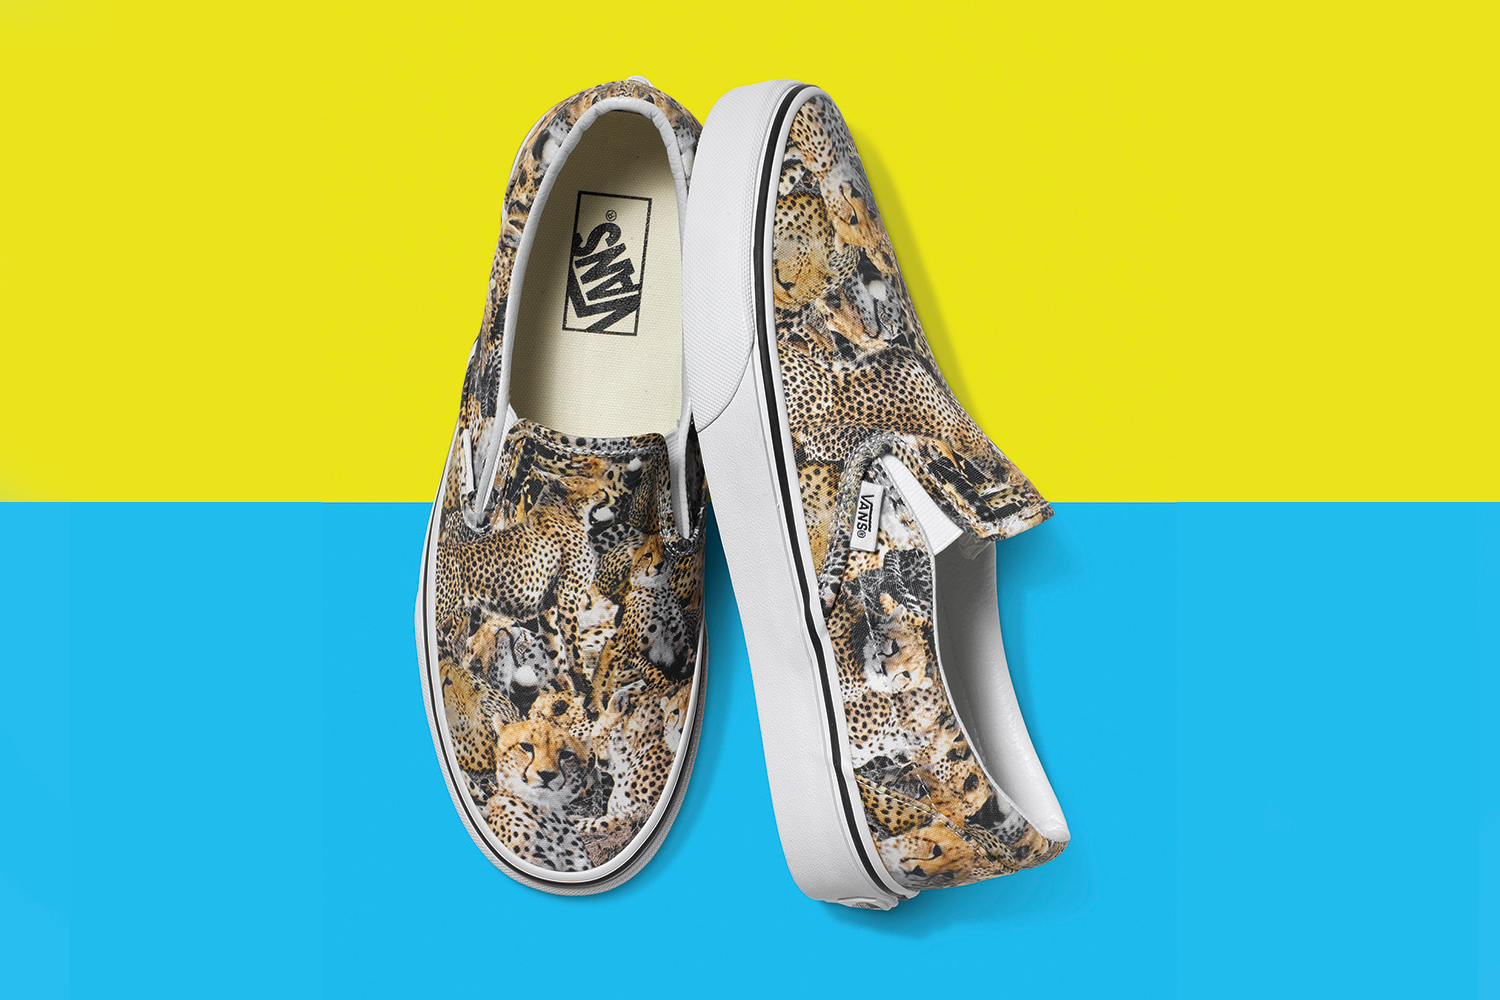 Vans Goes Wild with New Prints and Patterns | Sole Collector